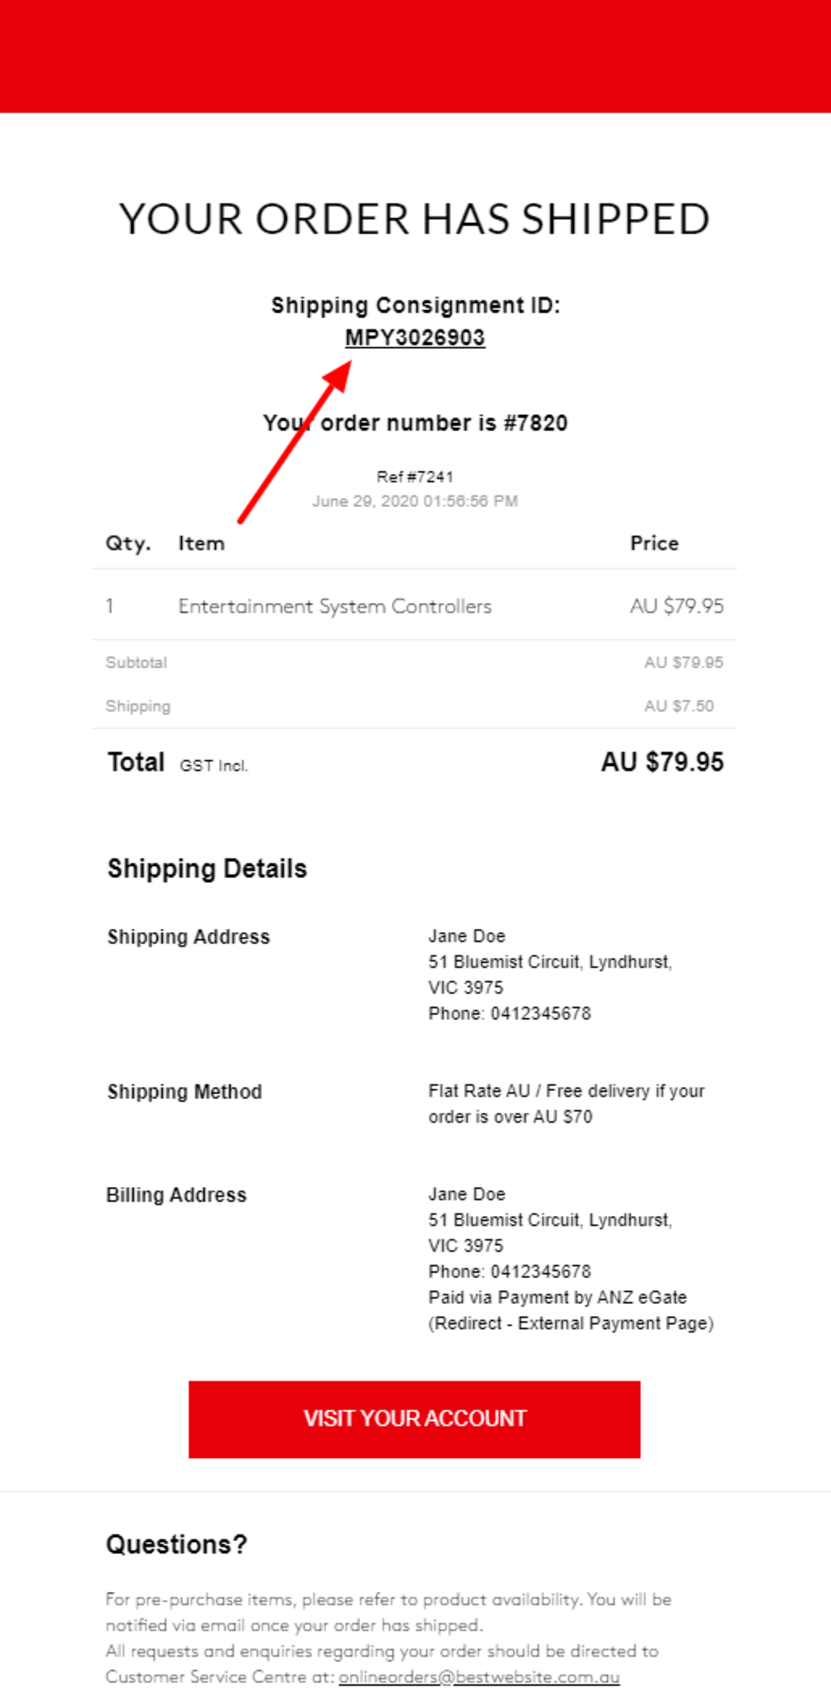 Ecommerce shipping best practices: Share tracking link